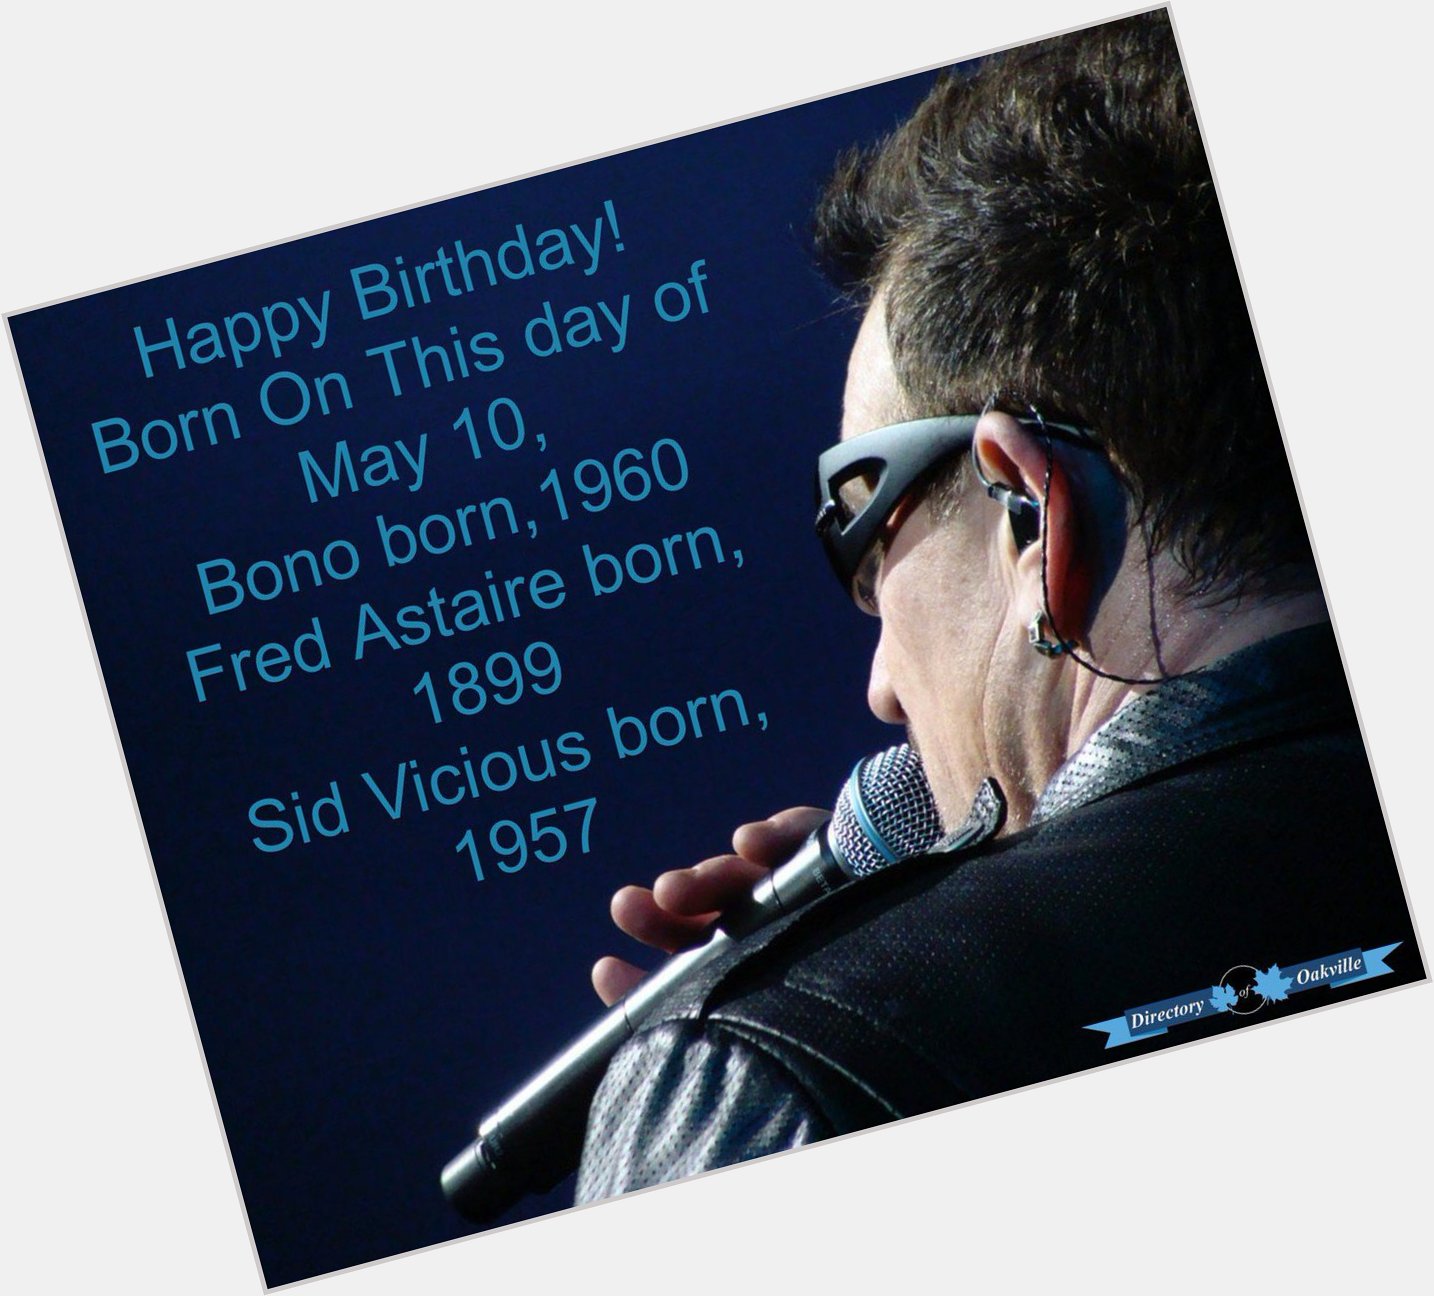 Happy Birthday! 
Born On This day of May 10,
Bono born,1960
Fred Astaire born,1899
Sid Vicious born, 1957 